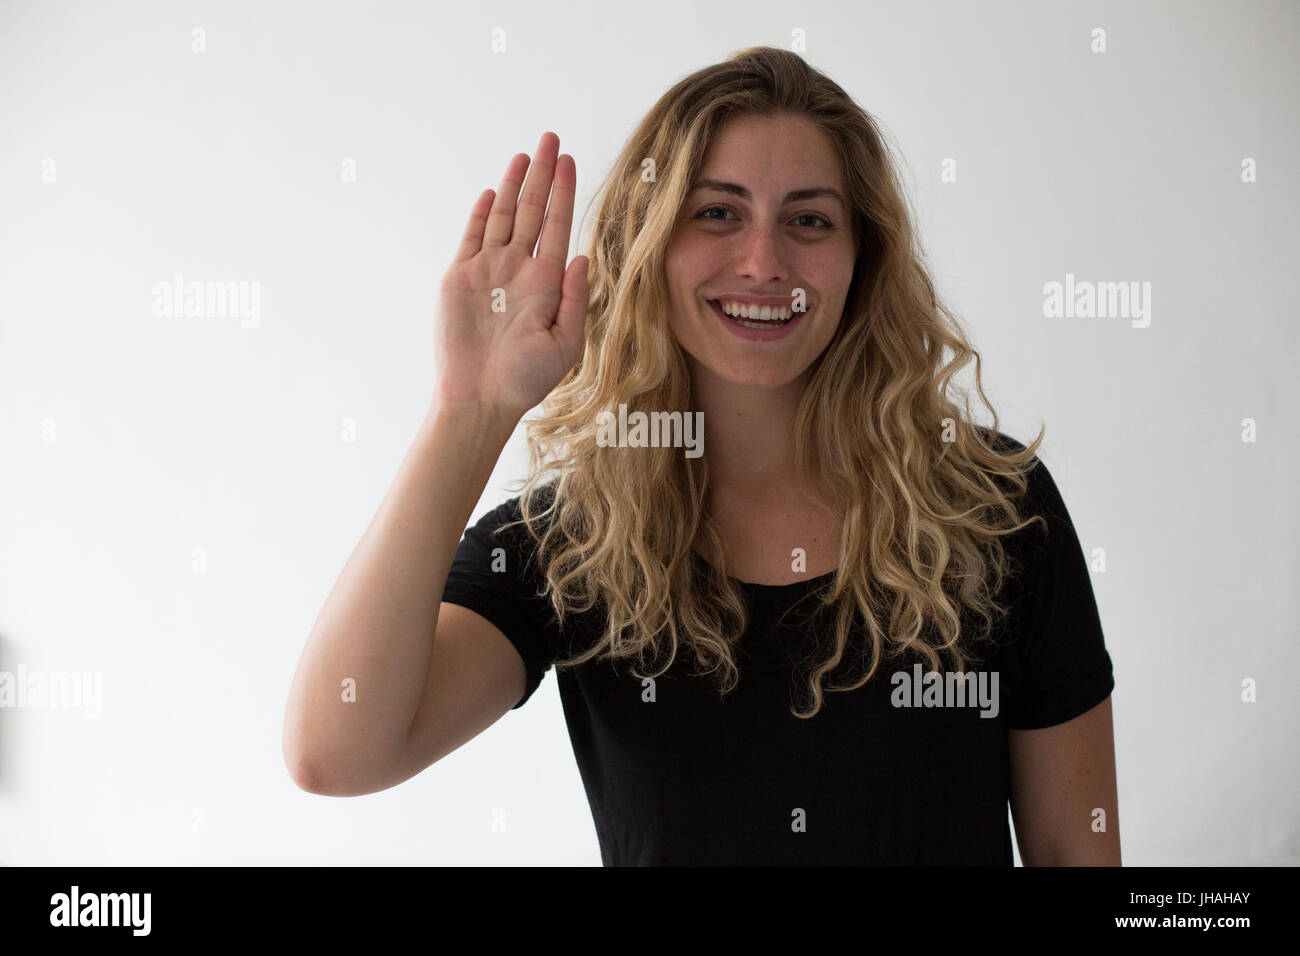 Young, blonde, caucasian milennial woman expressing emotion, happiness and smiling while waving her hand at the viewer against a white background. Stock Photo